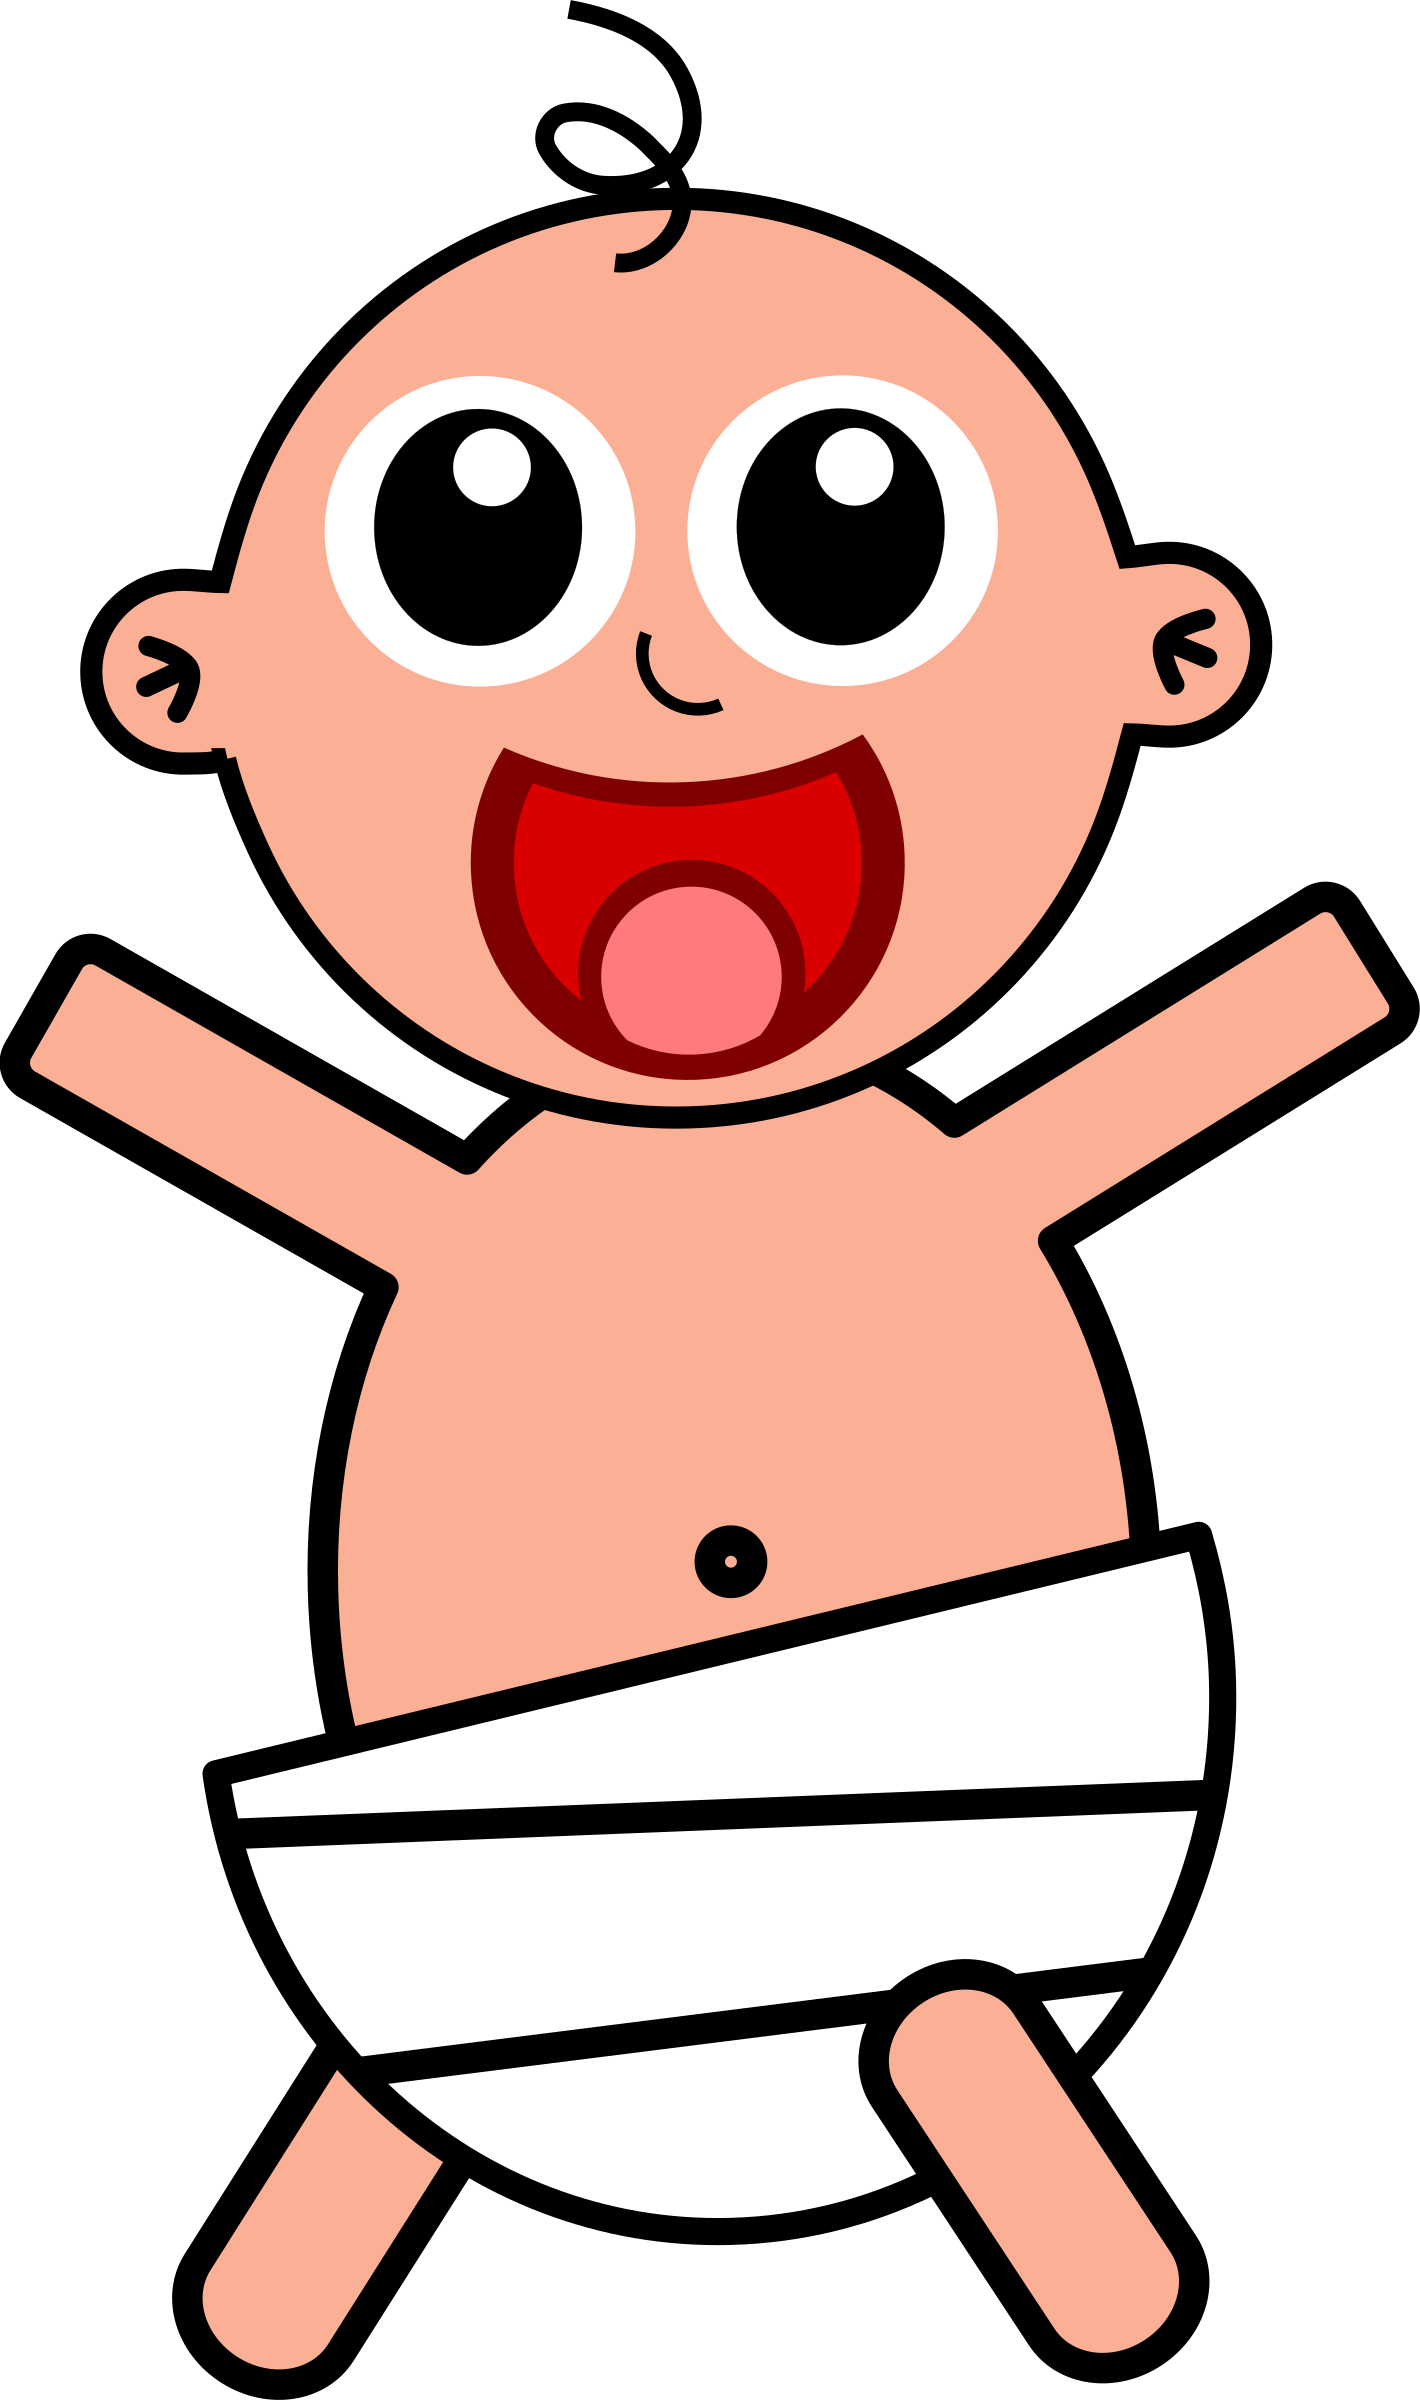 Baby big image png. Announcement clipart cute